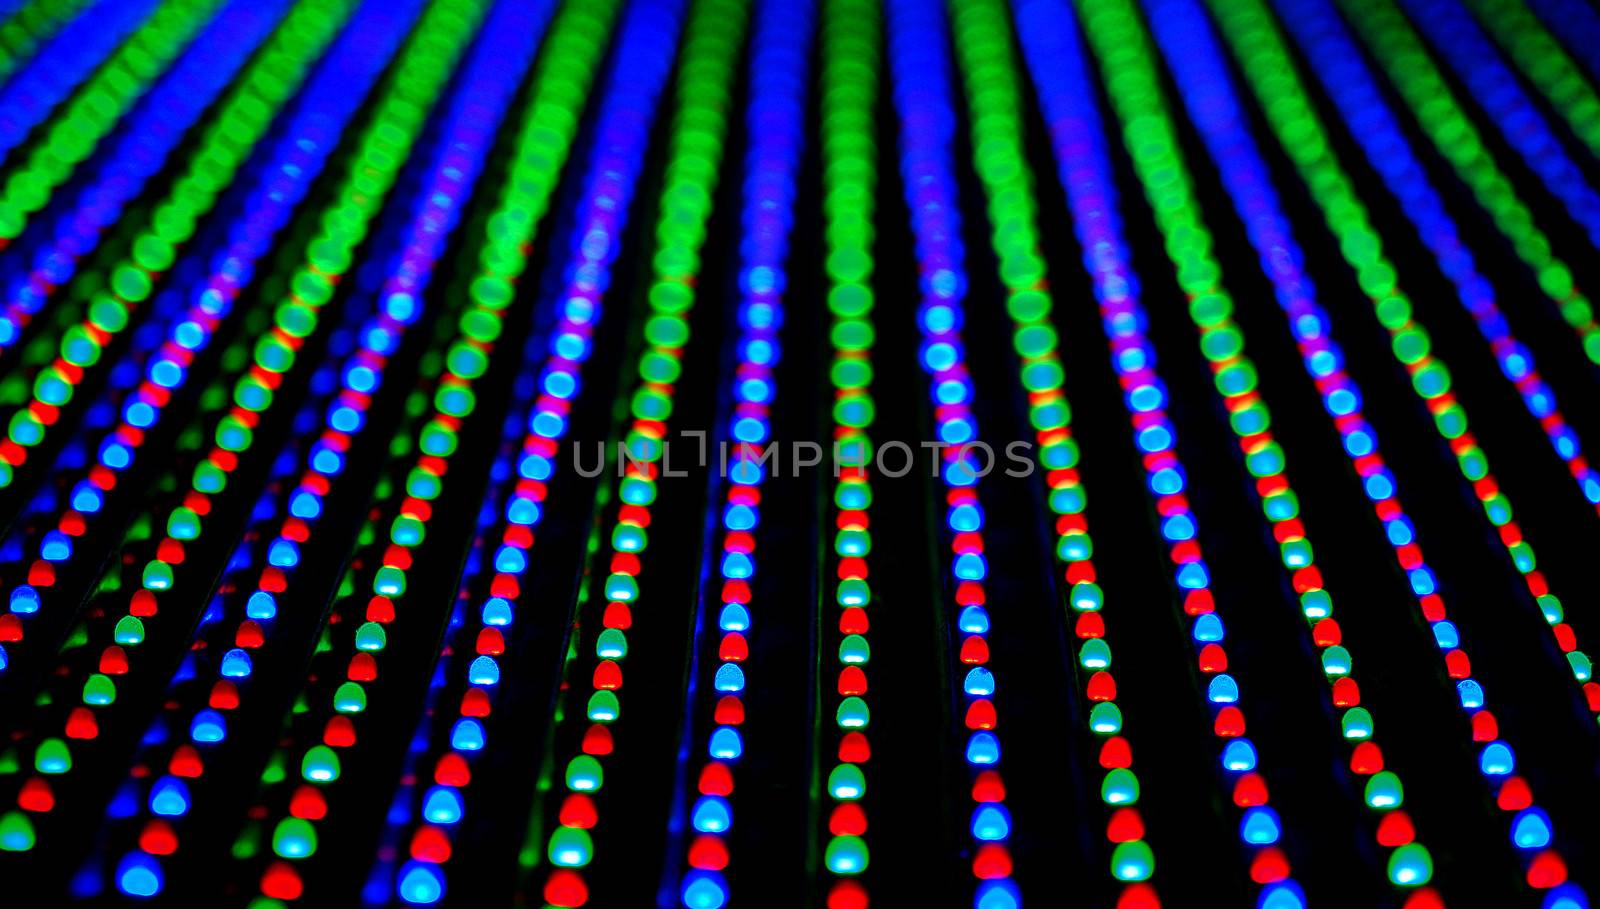 Led screen panel texture by ptxgarfield